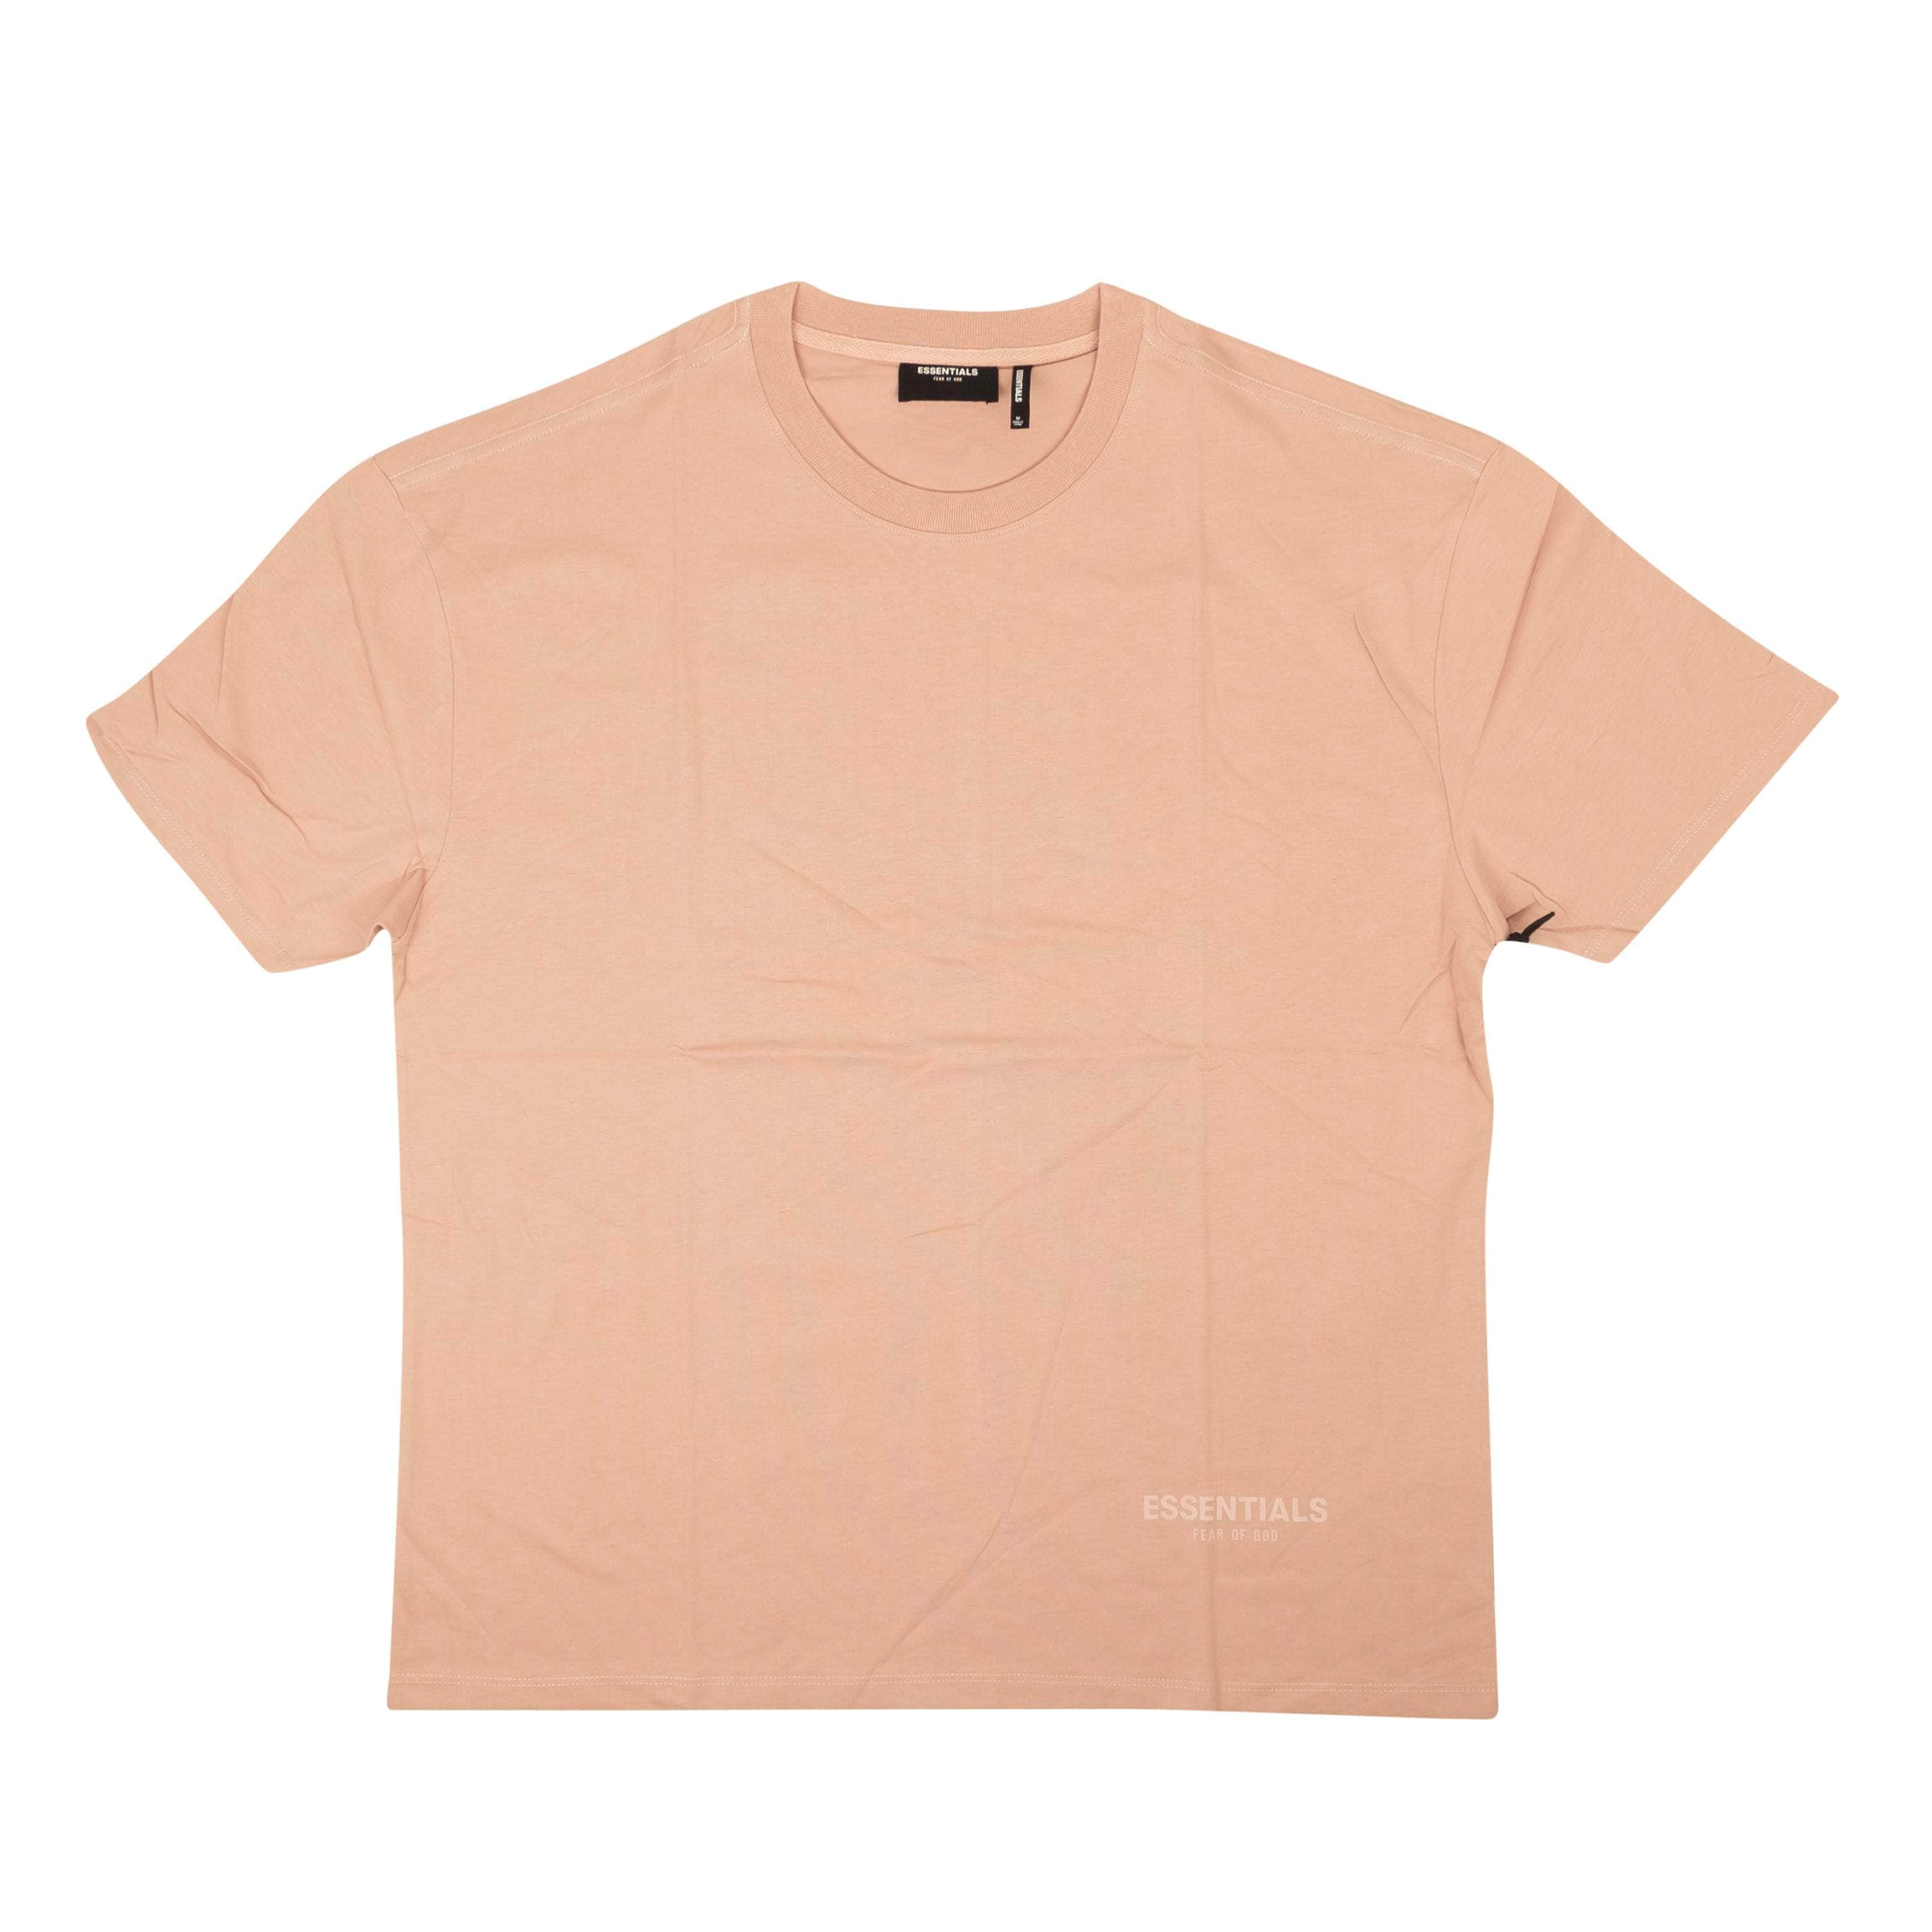 Fear Of God channelenable-all, chicmi, couponcollection, fear-of-god, gender-mens, main-clothing, mens-shoes, size-l, size-m, size-s, size-xl, size-xs, under-250 XL Pink Reflective Short Sleeve T-Shirt 95-EFG-1009/XL 95-EFG-1009/XL